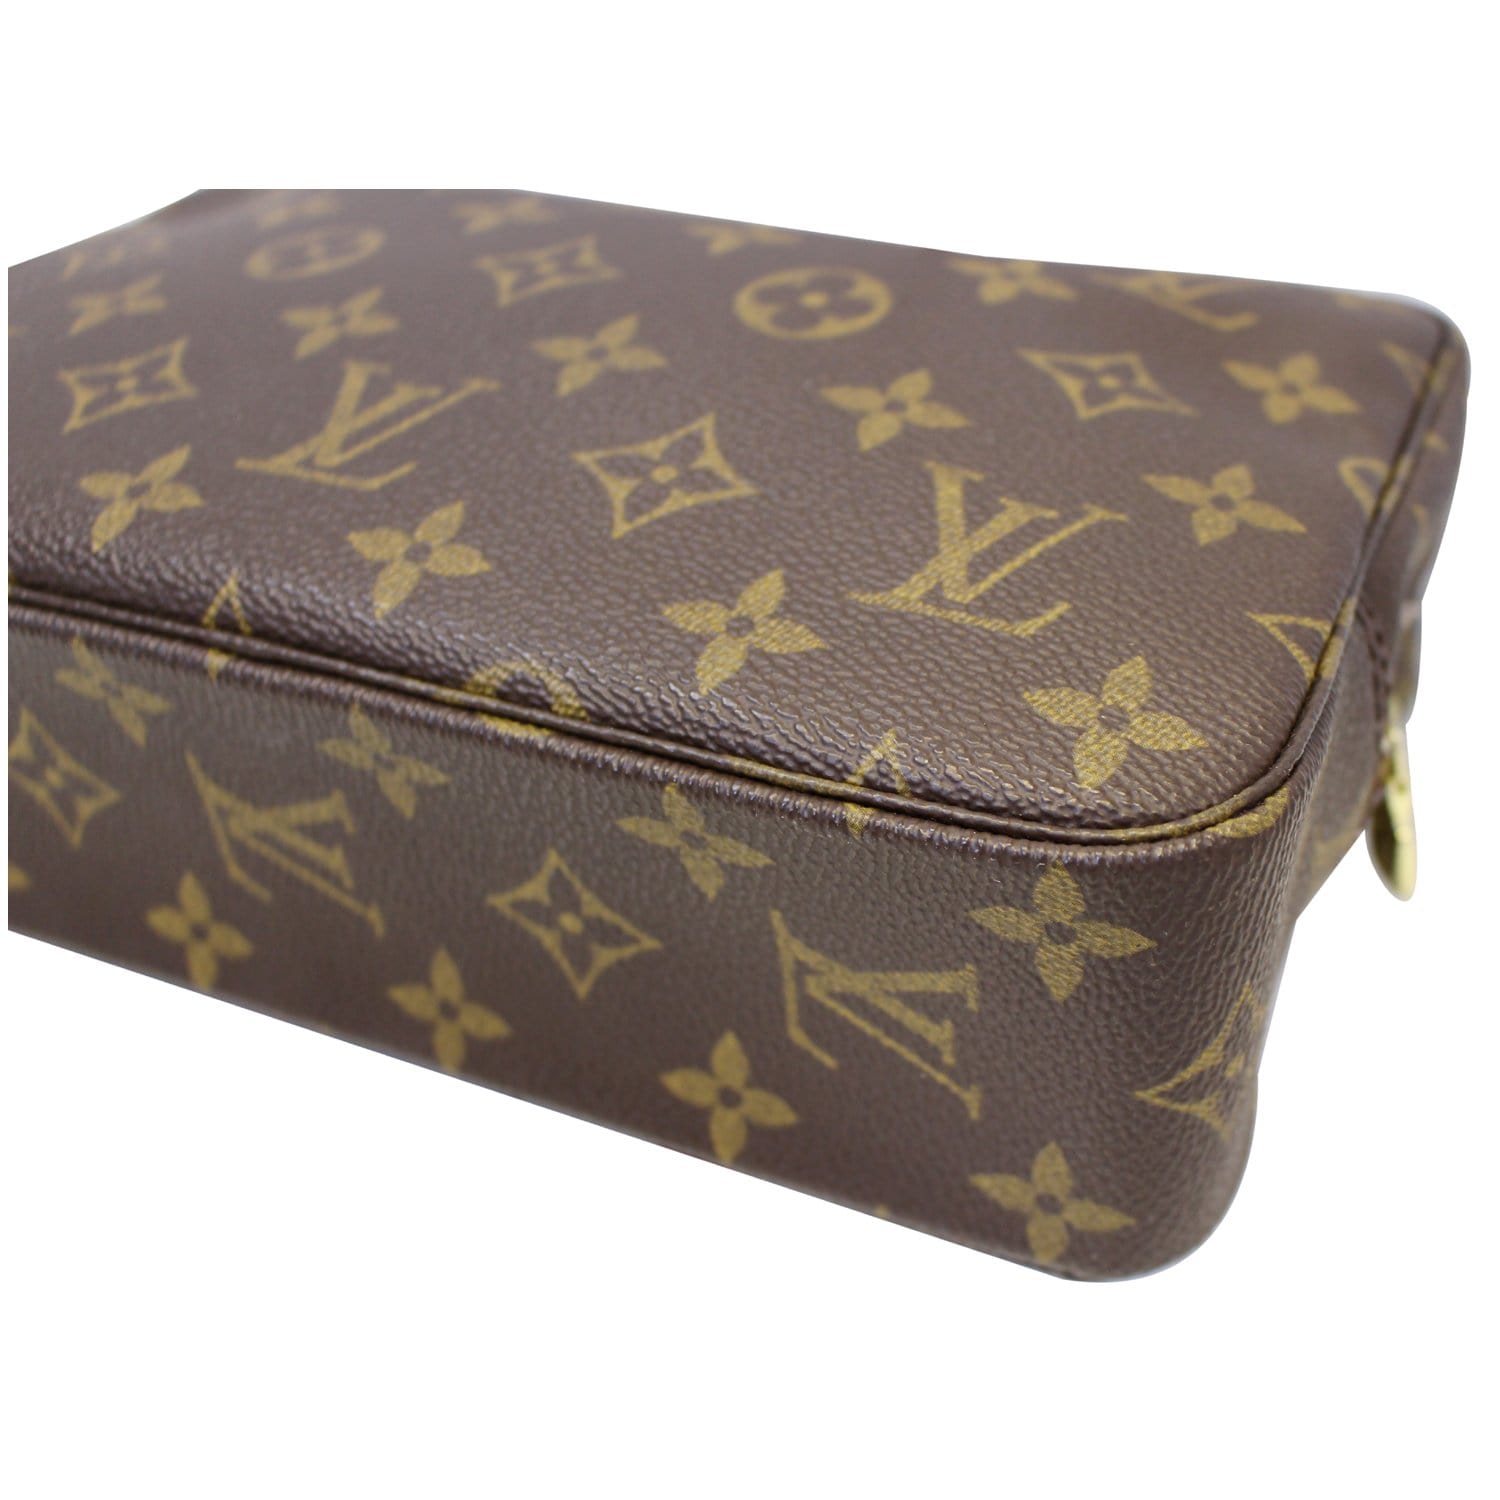 Louis Vuitton Monogram Vernis Trousse Cosmetic Pouch - Green Cosmetic Bags,  Accessories - LOU768991